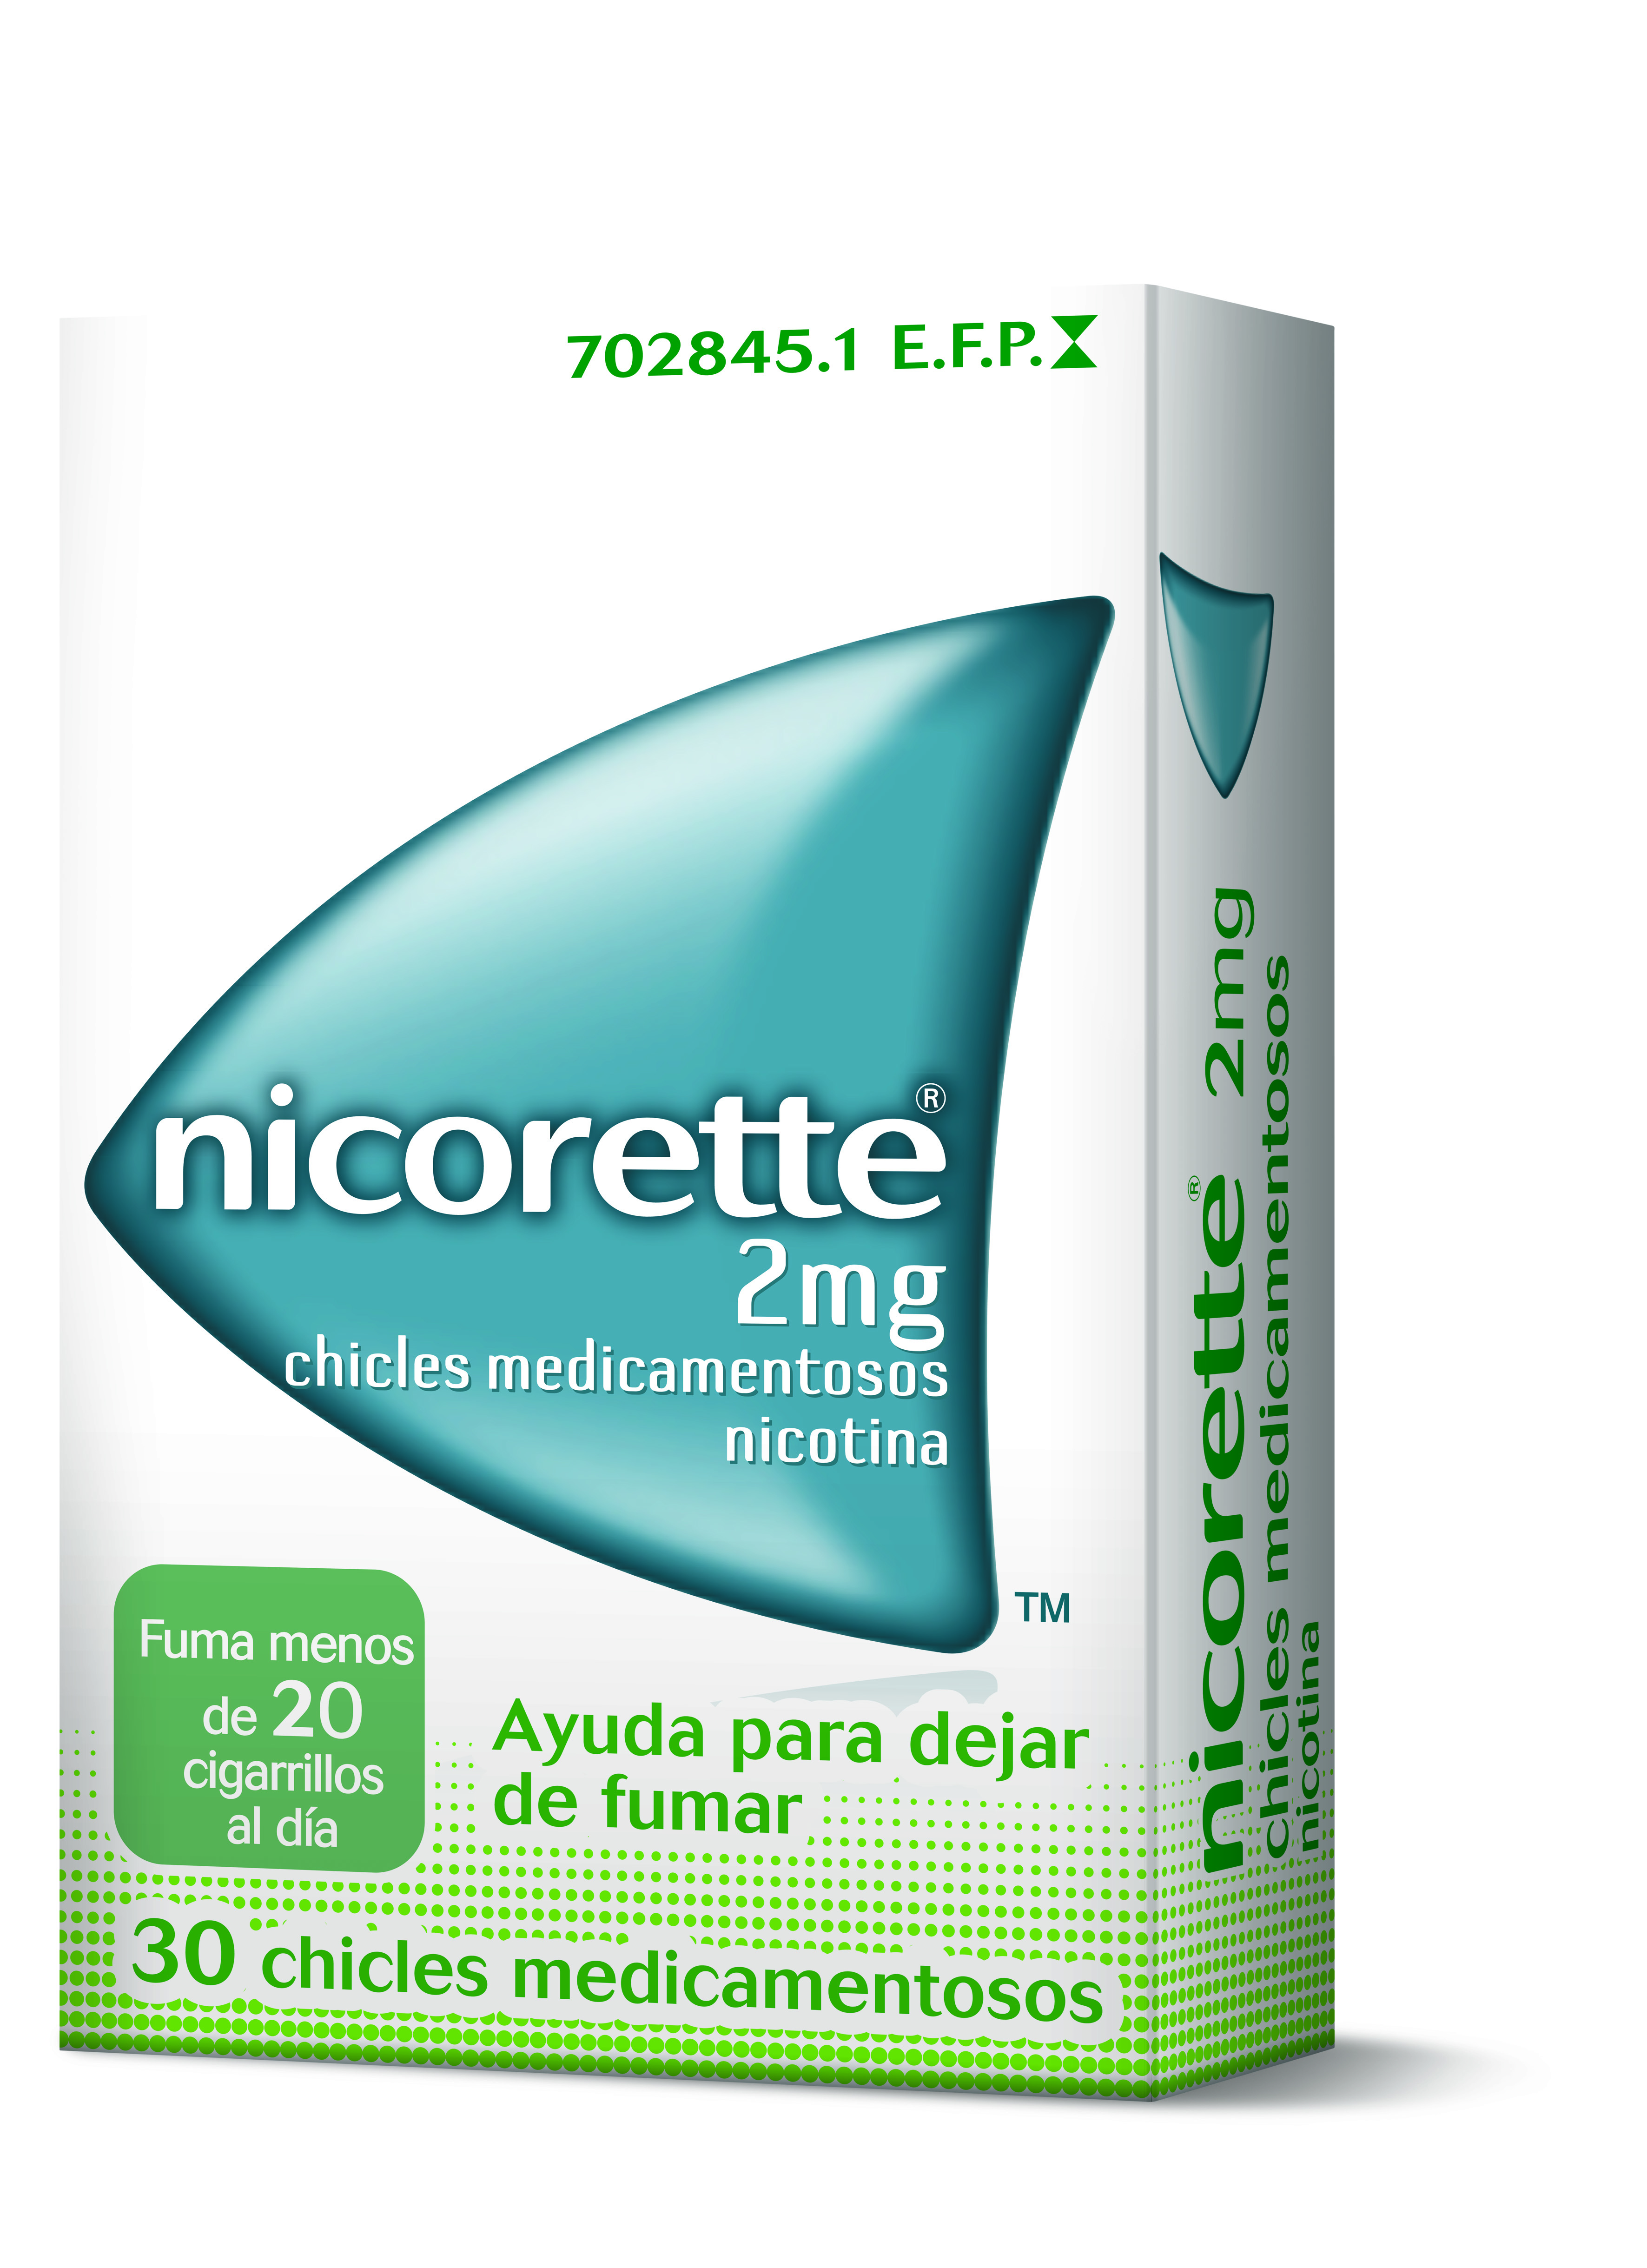 NICORETTE 2 MG CHICLES MEDICAMENTOSOS 30 CHICLES